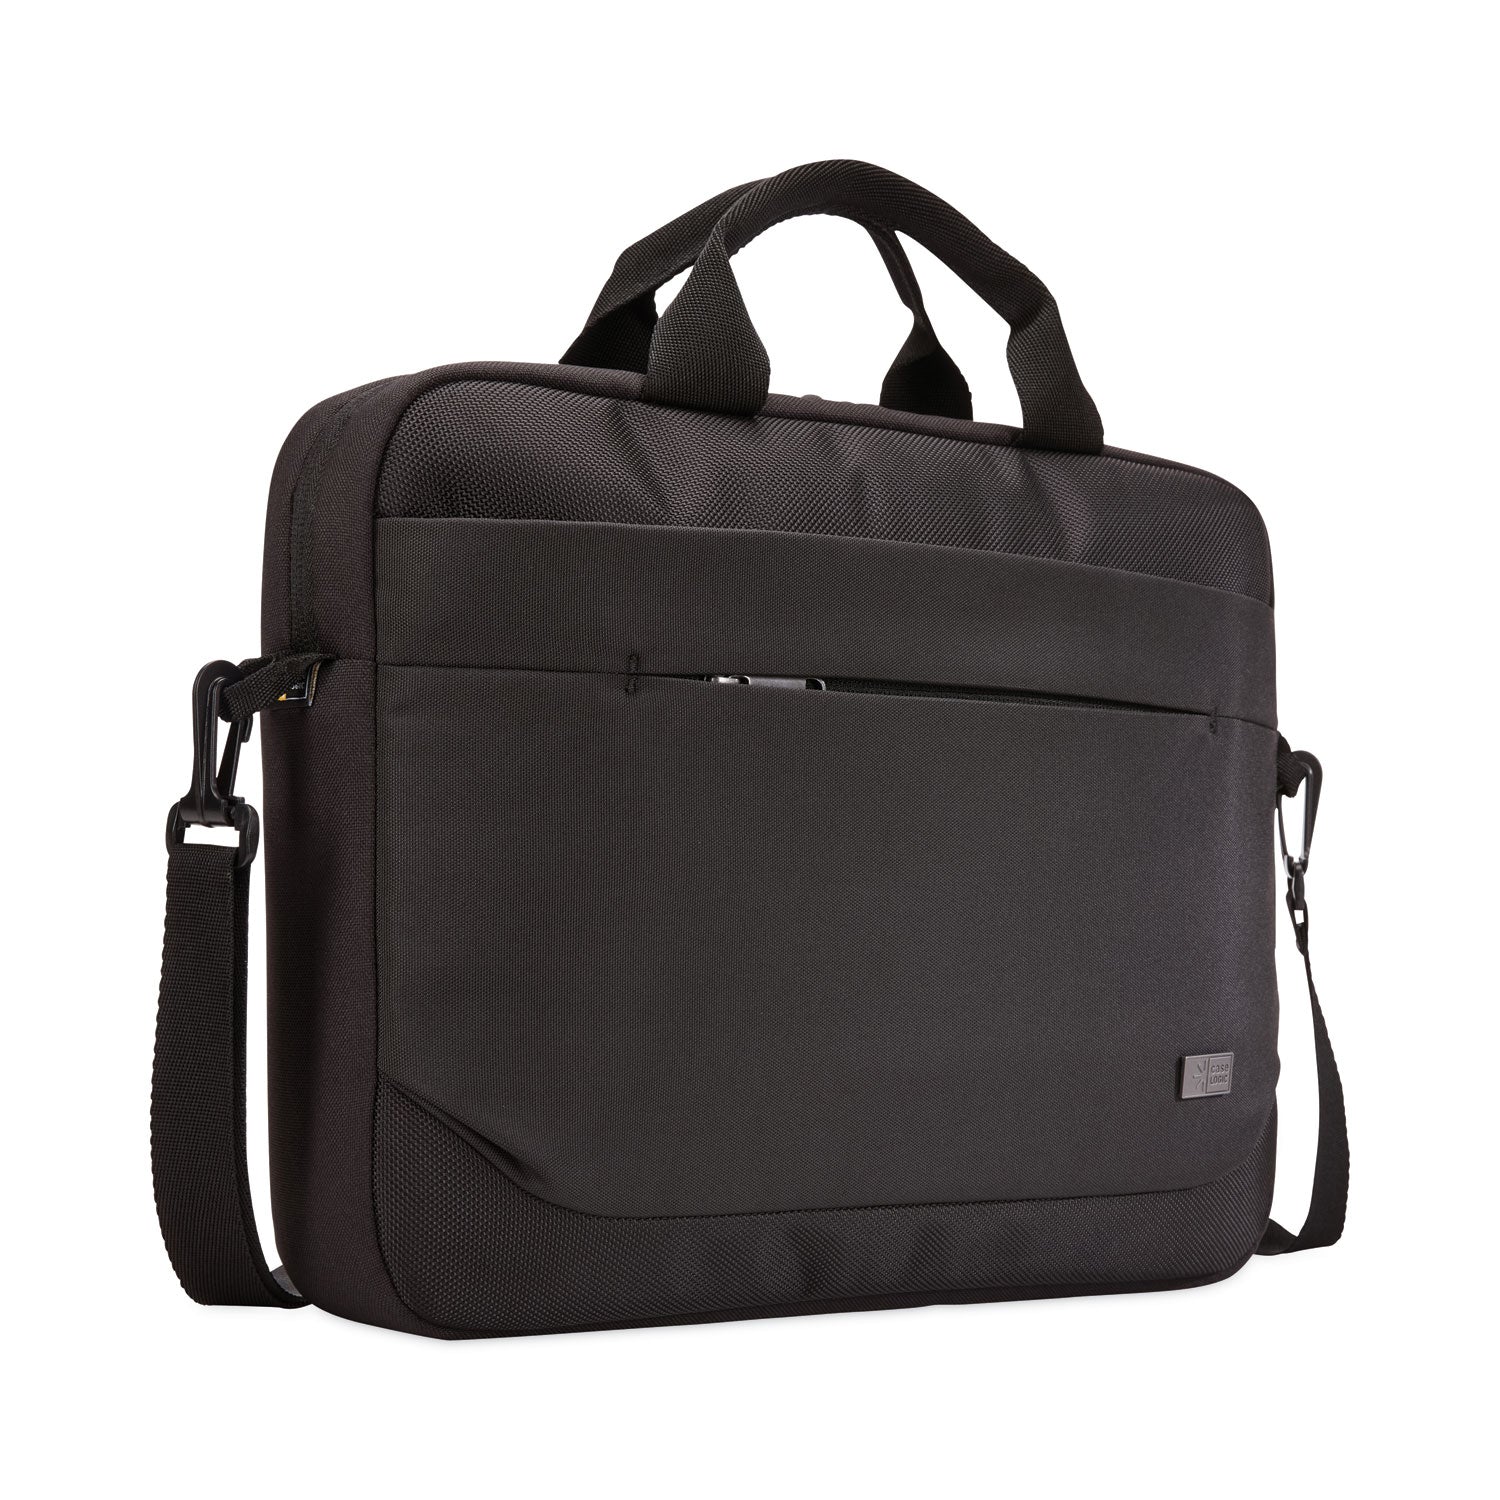 advantage-laptop-attache-fits-devices-up-to-156-polyester-161-x-28-x-138-black_clg3203988 - 2